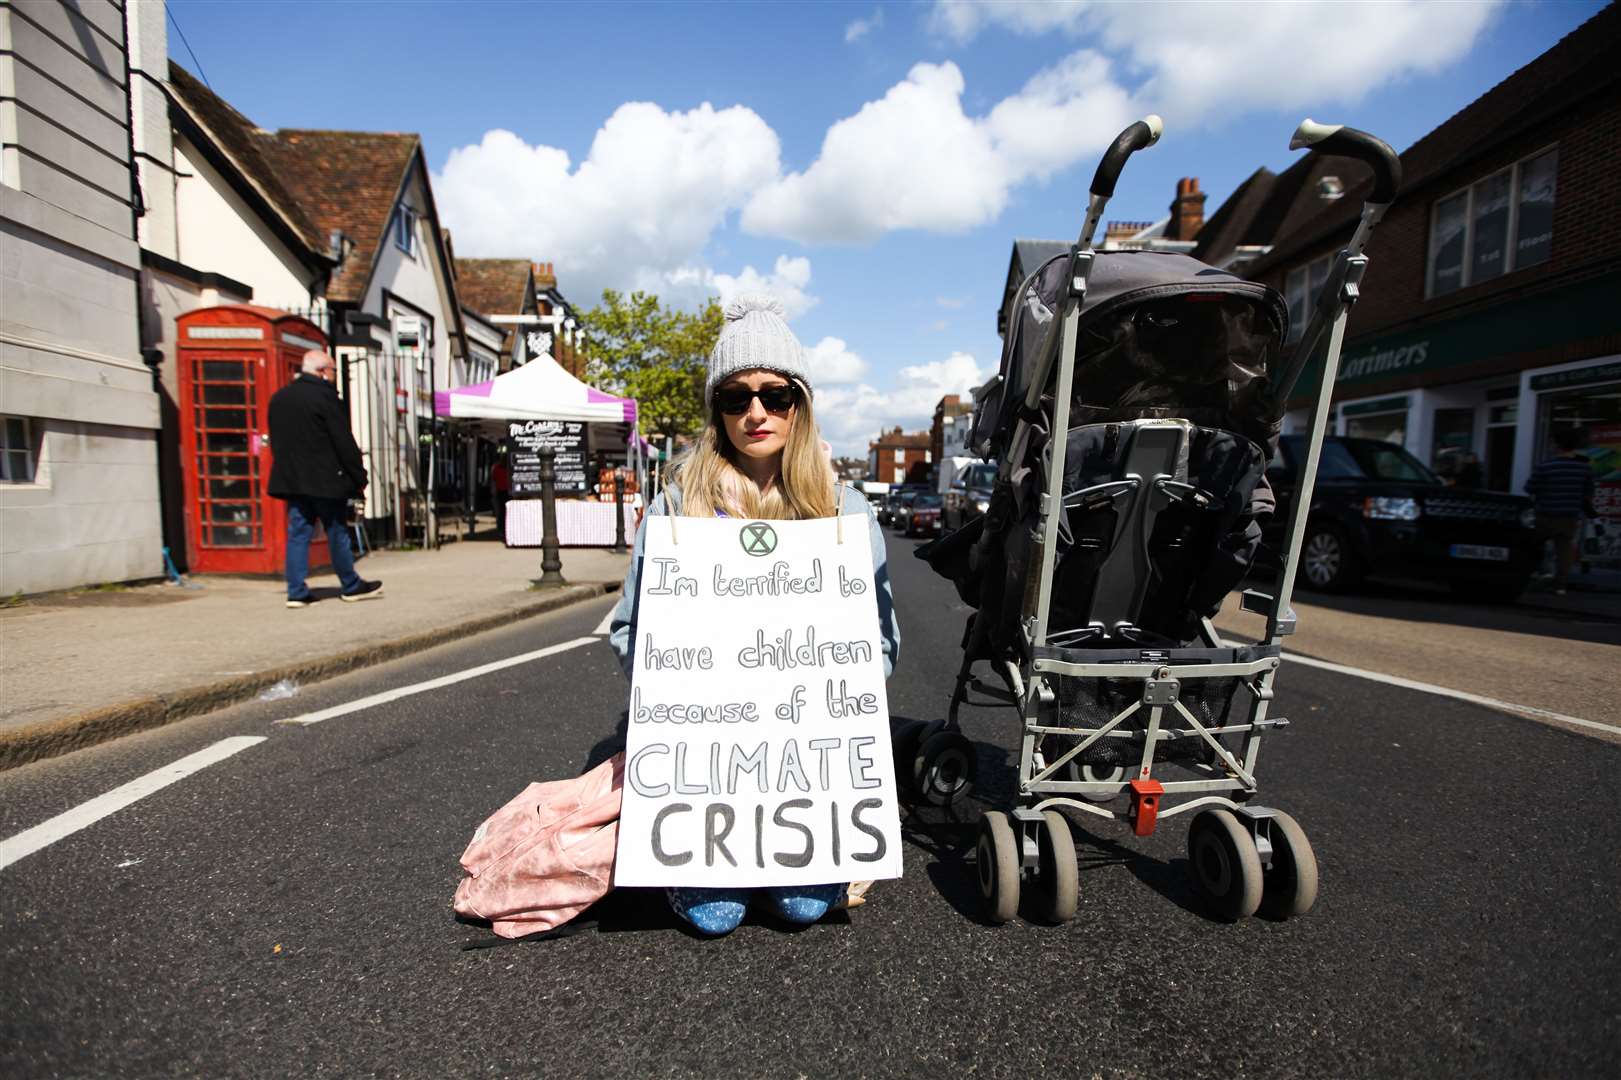 A lone woman with a pushchair blocked traffic in Sevenoaks, as part of countrywide action by Extinction Rebellion. Image from Extinction Rebellion